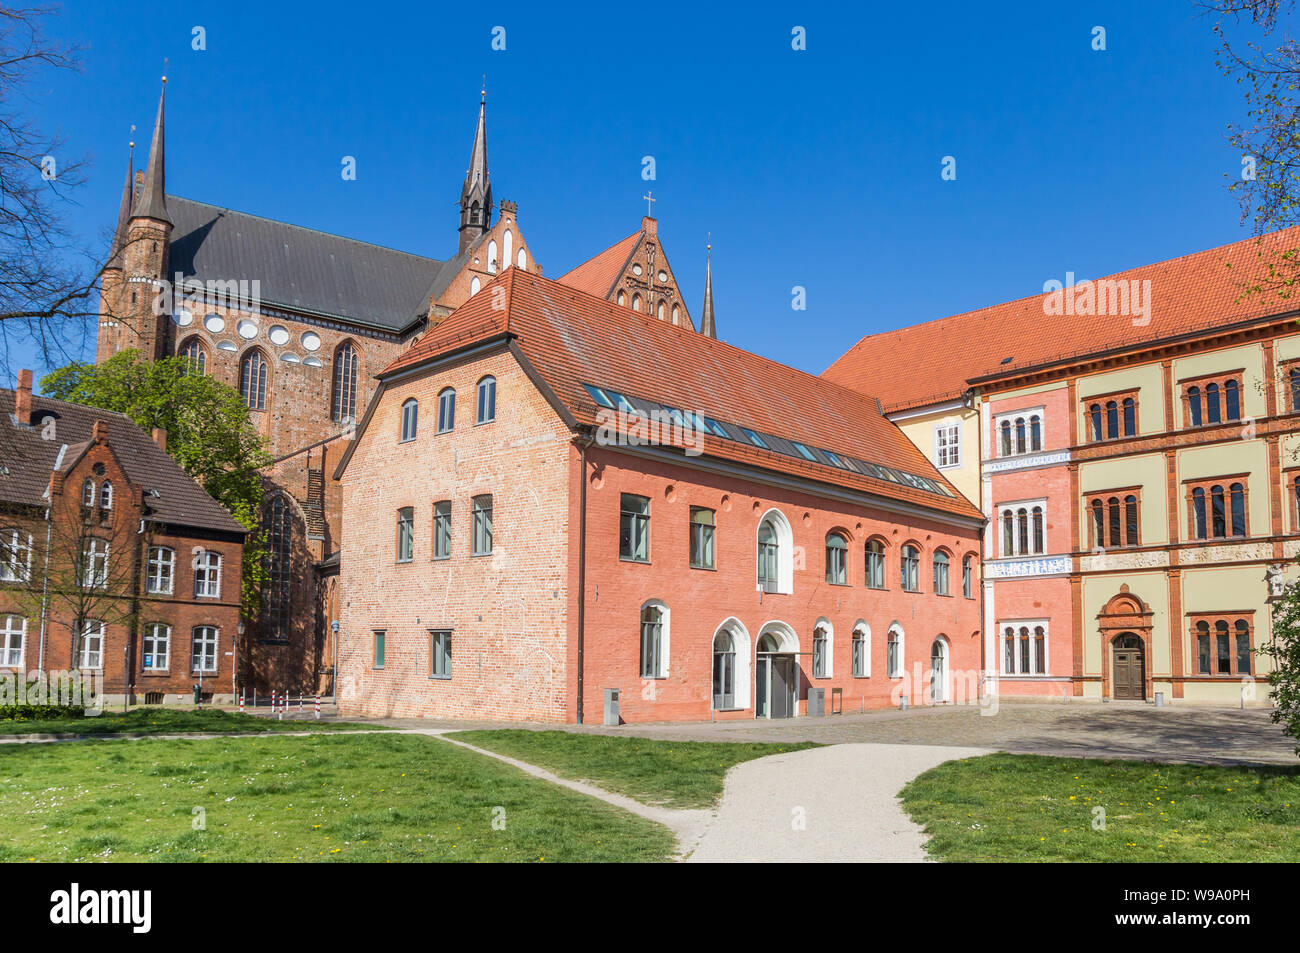 Colorful buildings of the Furstenhof palace in Wismar, Germany Stock Photo